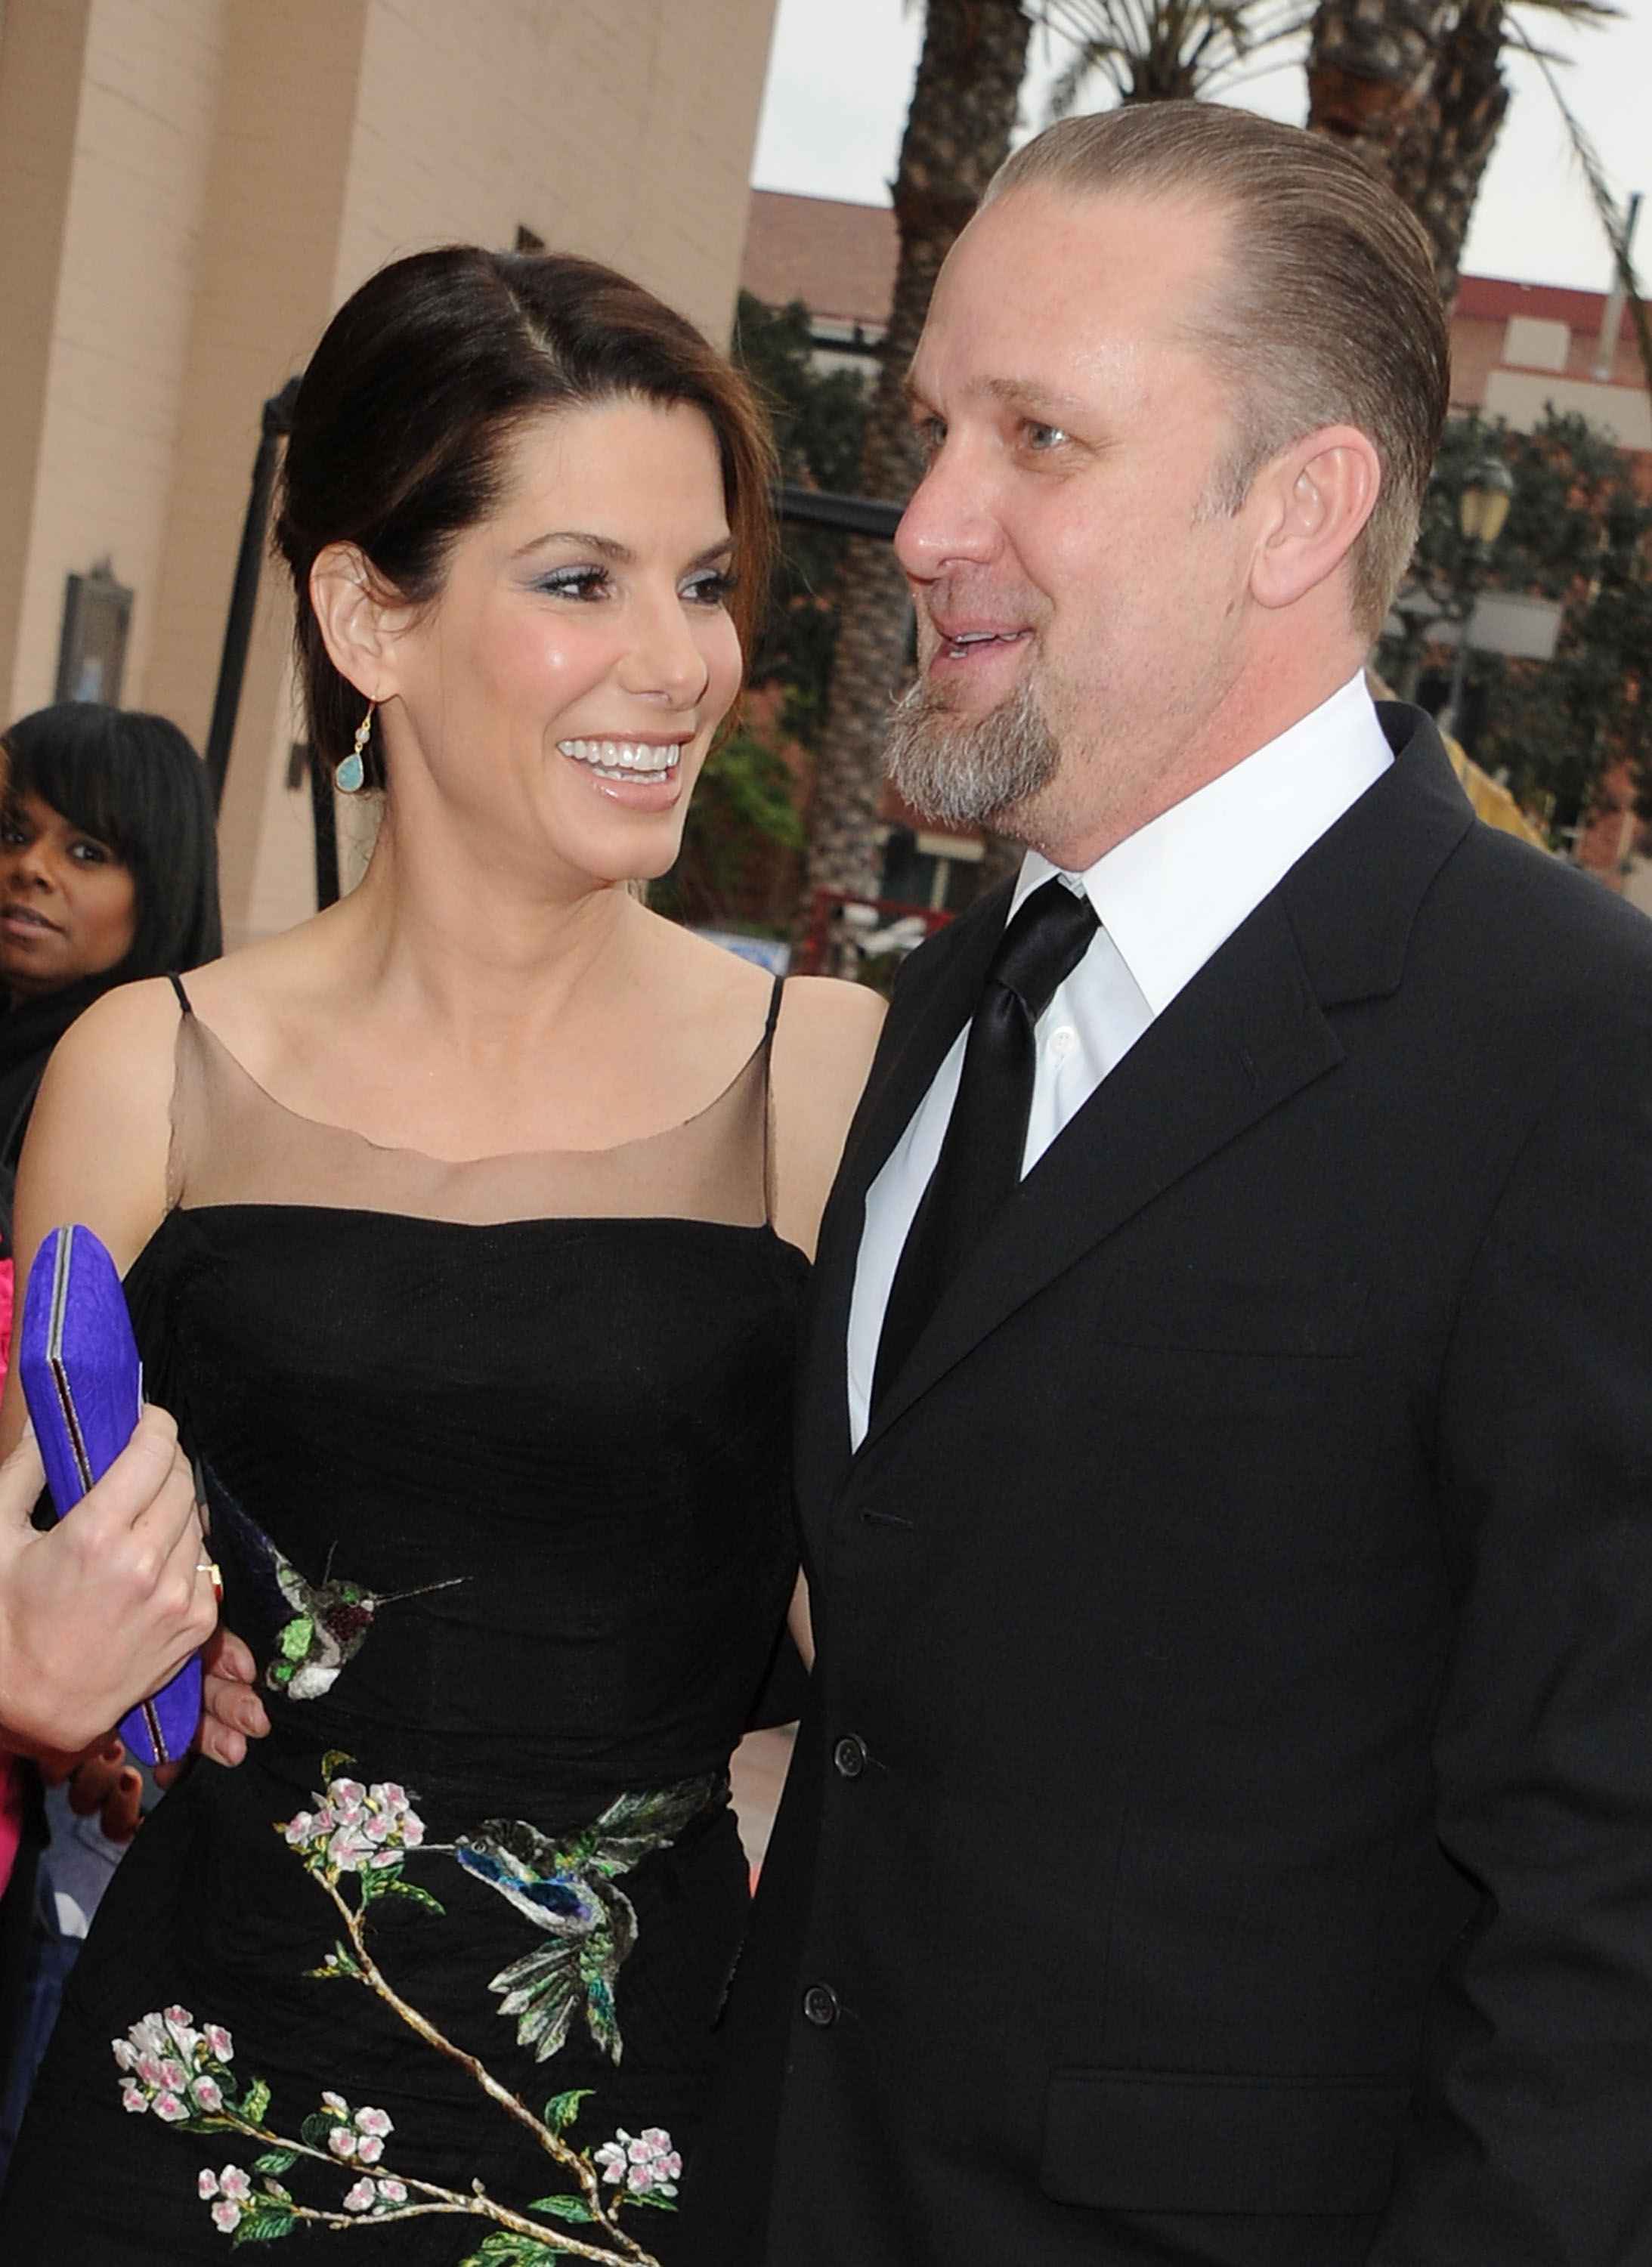 Sandra Bullock and Jesse James attend the 41st NAACP Image Awards on February 26, 2010 in Los Angeles, California | Source: Getty Images